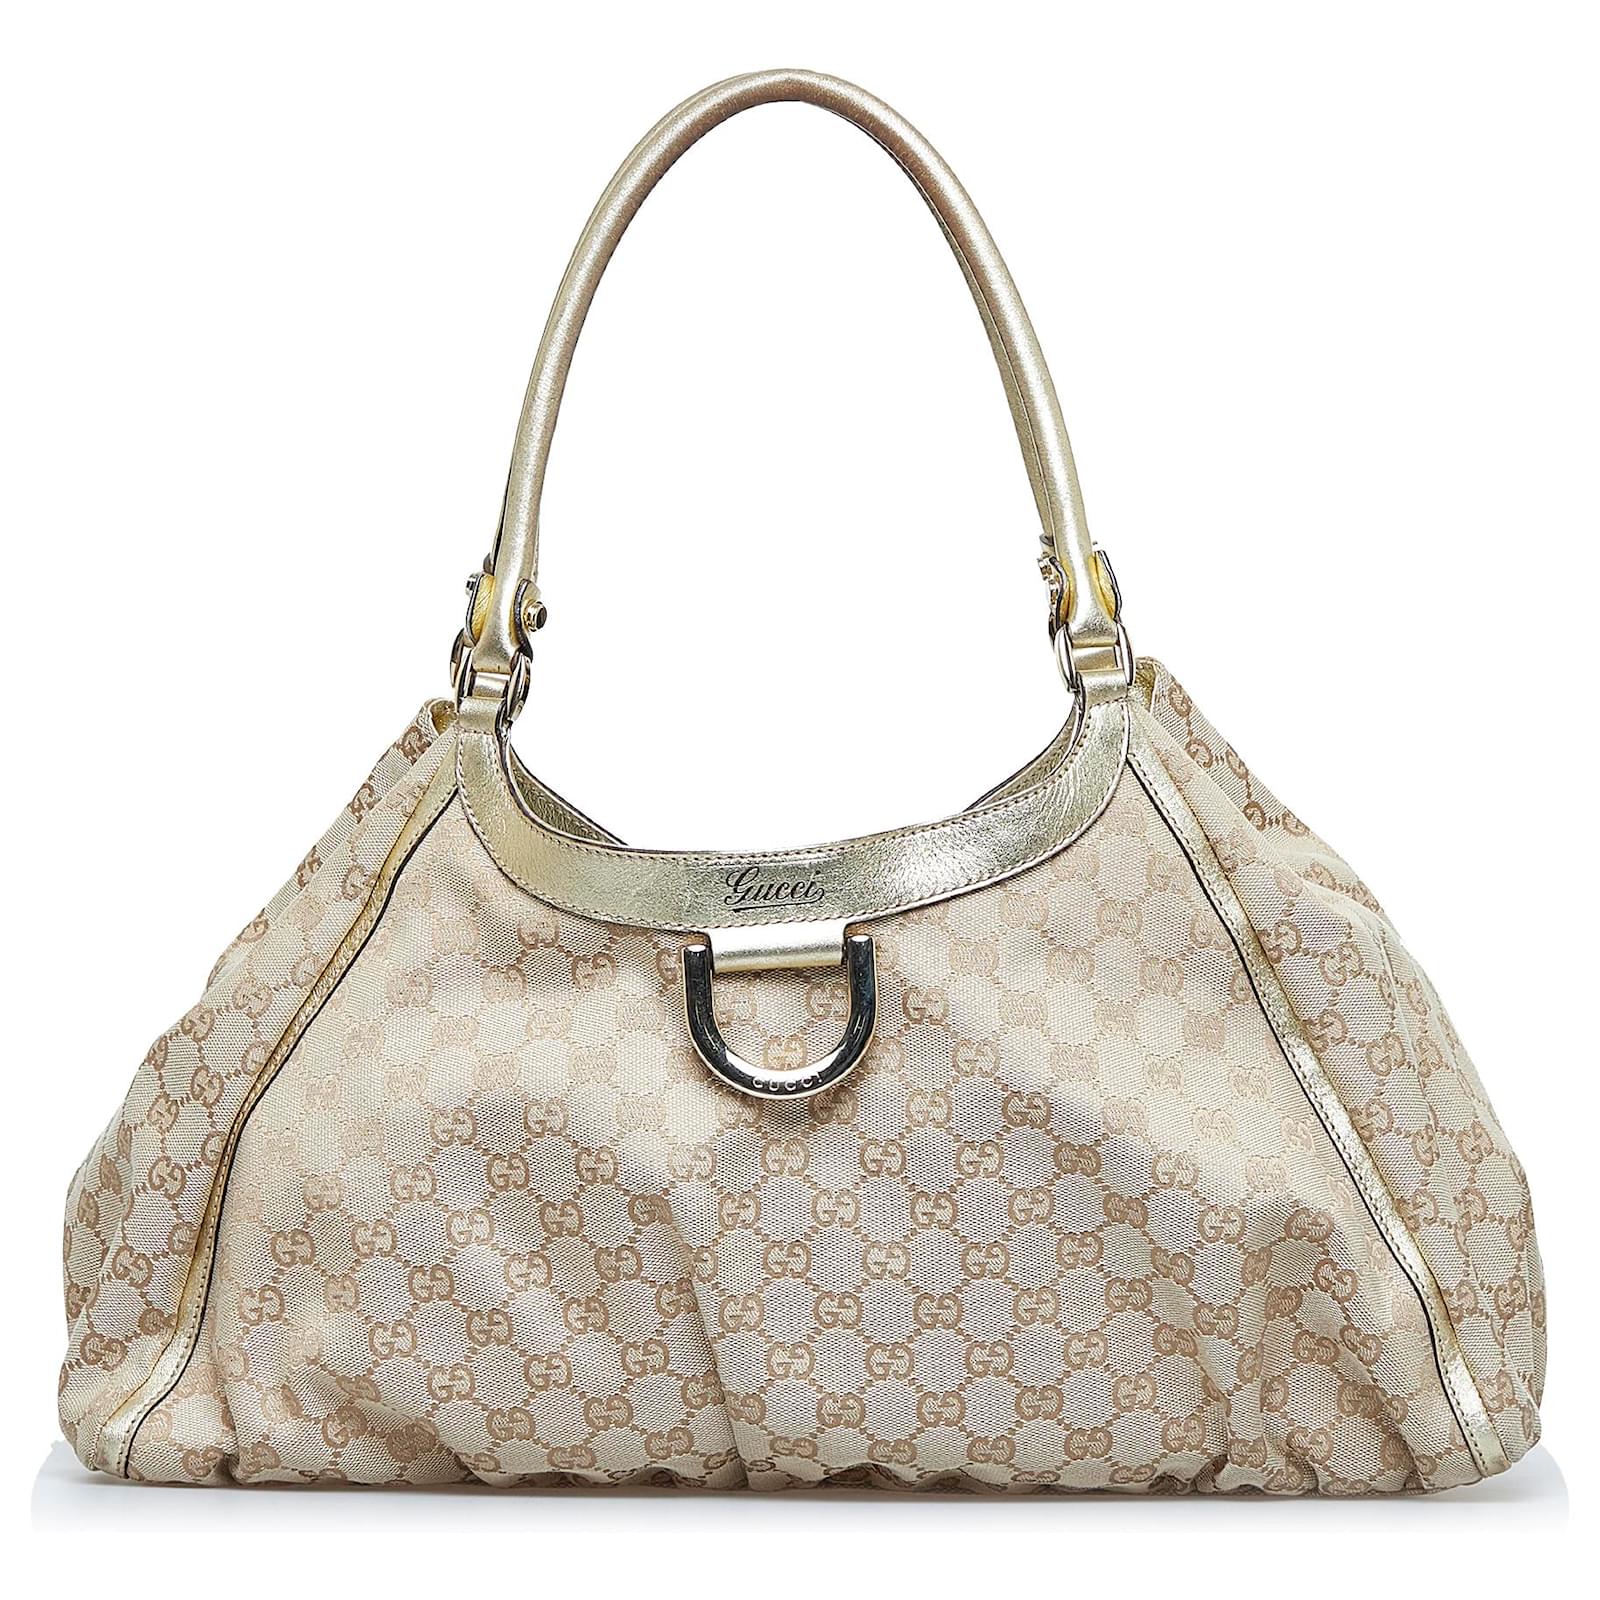 Gucci Large D-Ring Leather Hobo Bag